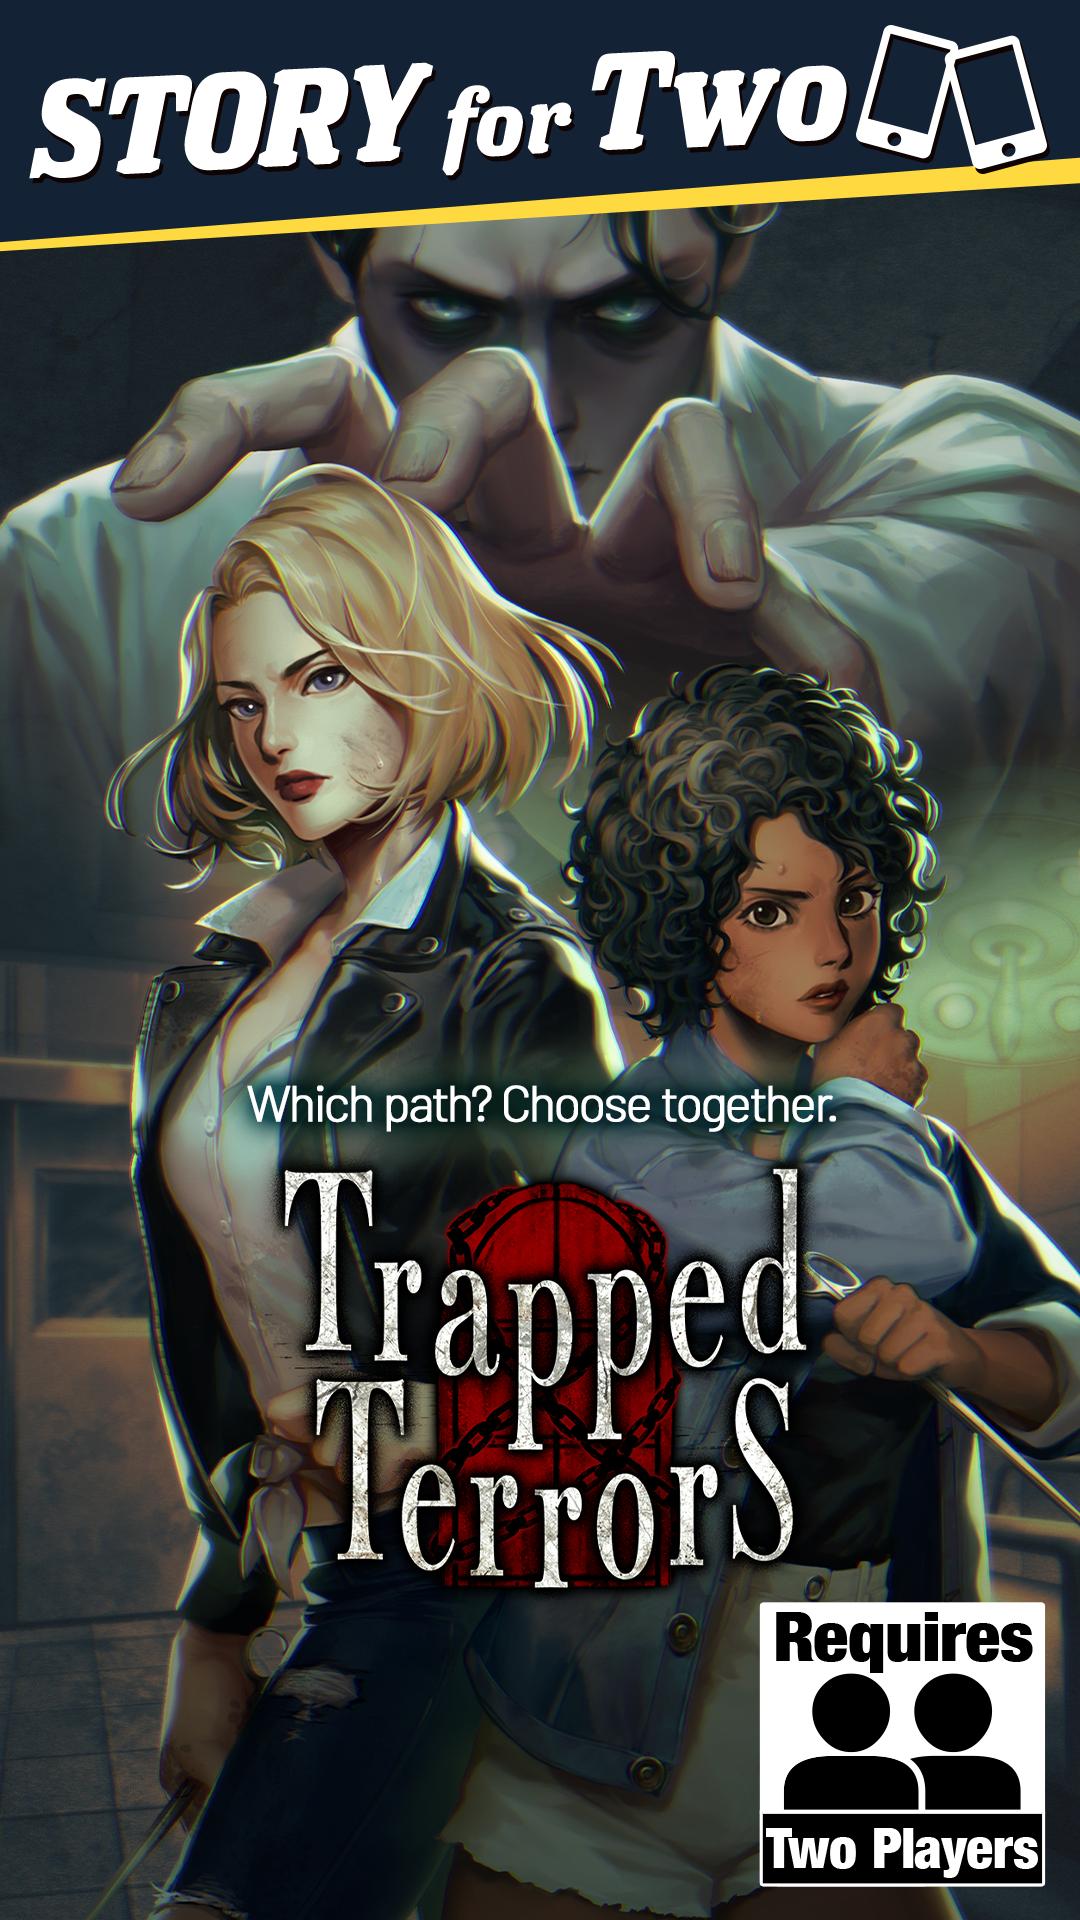 Trapped Terrors: A Story for Two 1.0.0 Screenshot 7